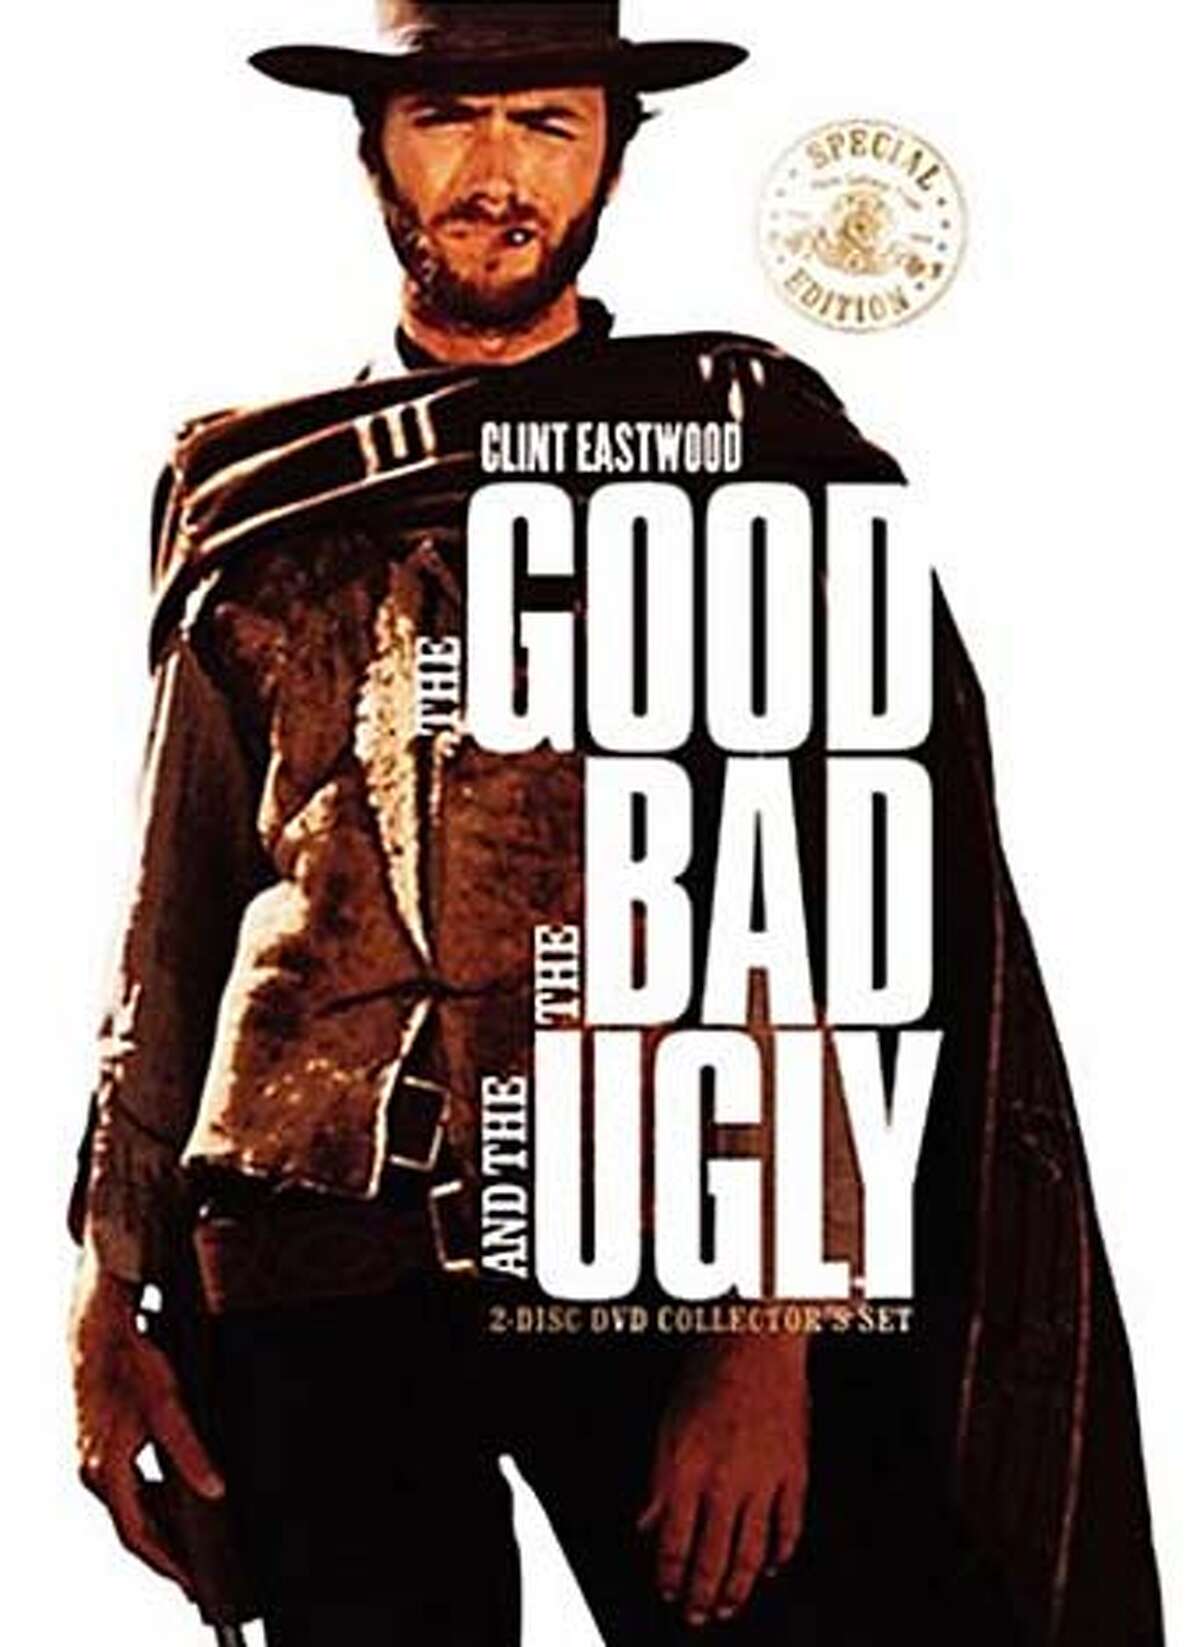 DVDS16_GOOD_HO DVD cover of THE GOOD, THE BAD AND THE UGLY